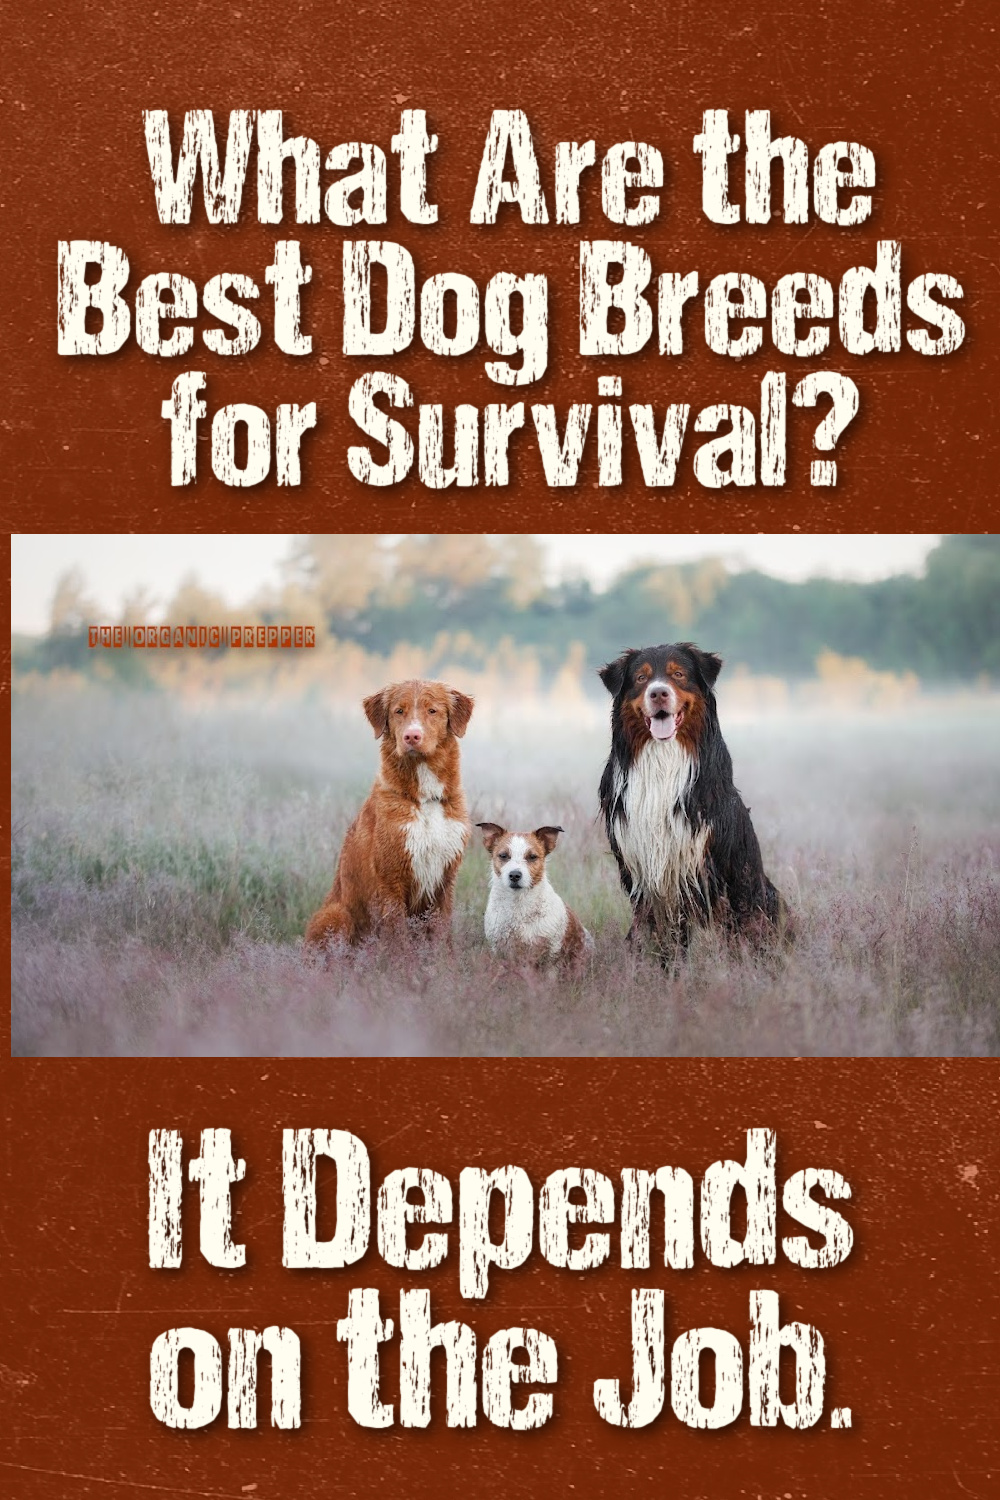 What Are the Best Dog Breeds for Survival? It Depends on the Job